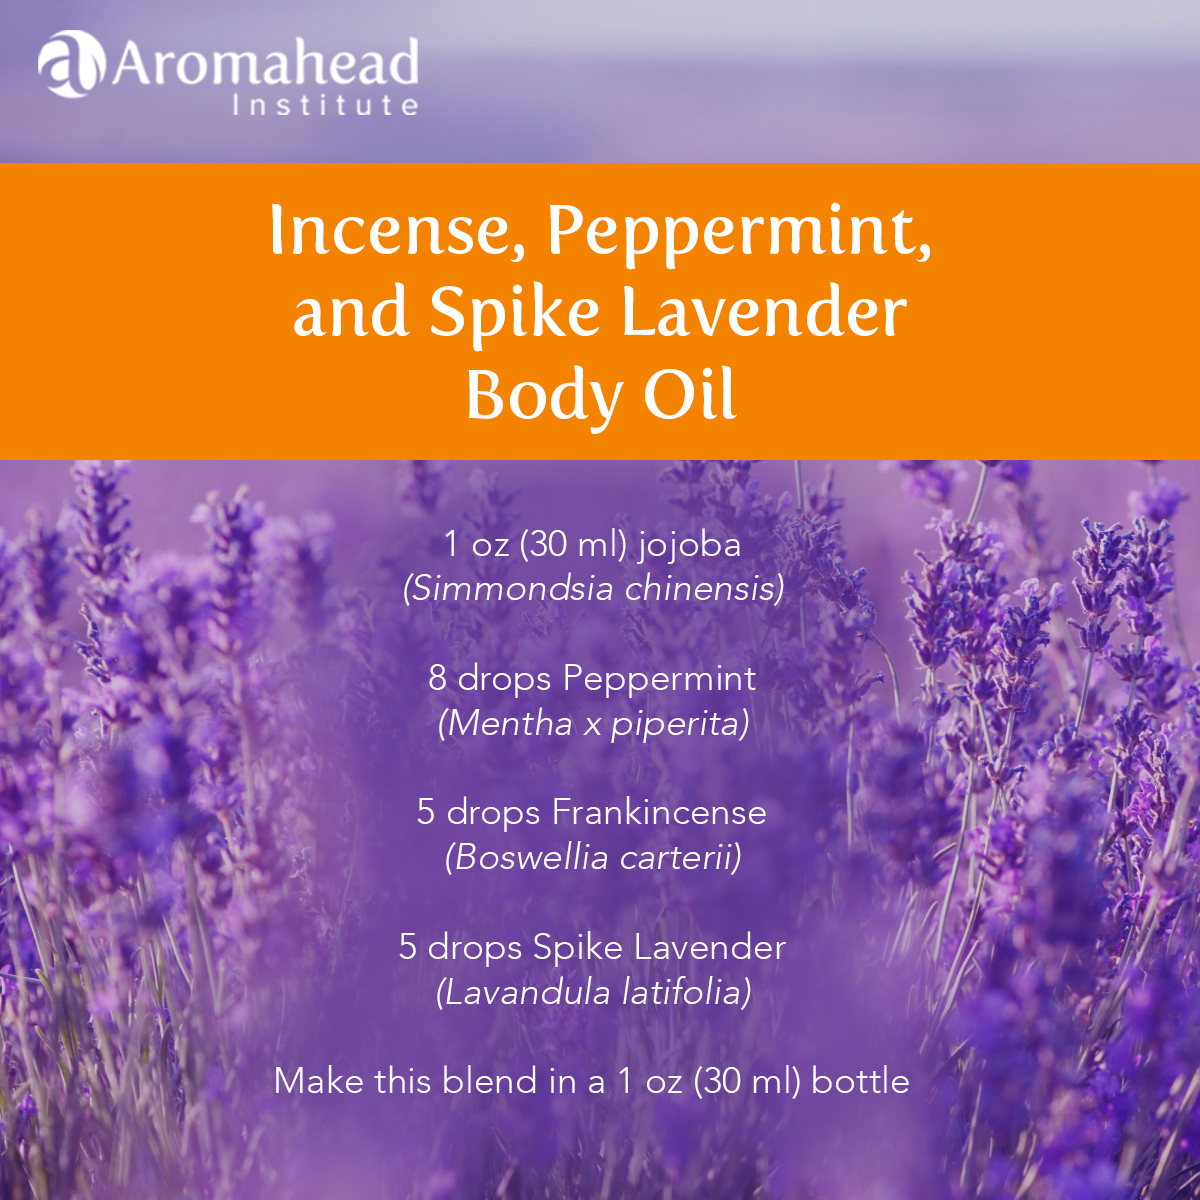 Blog-Oct 22-Incense Peppermint and Spike Lavender Body Oil- Recipe- 600 x 600